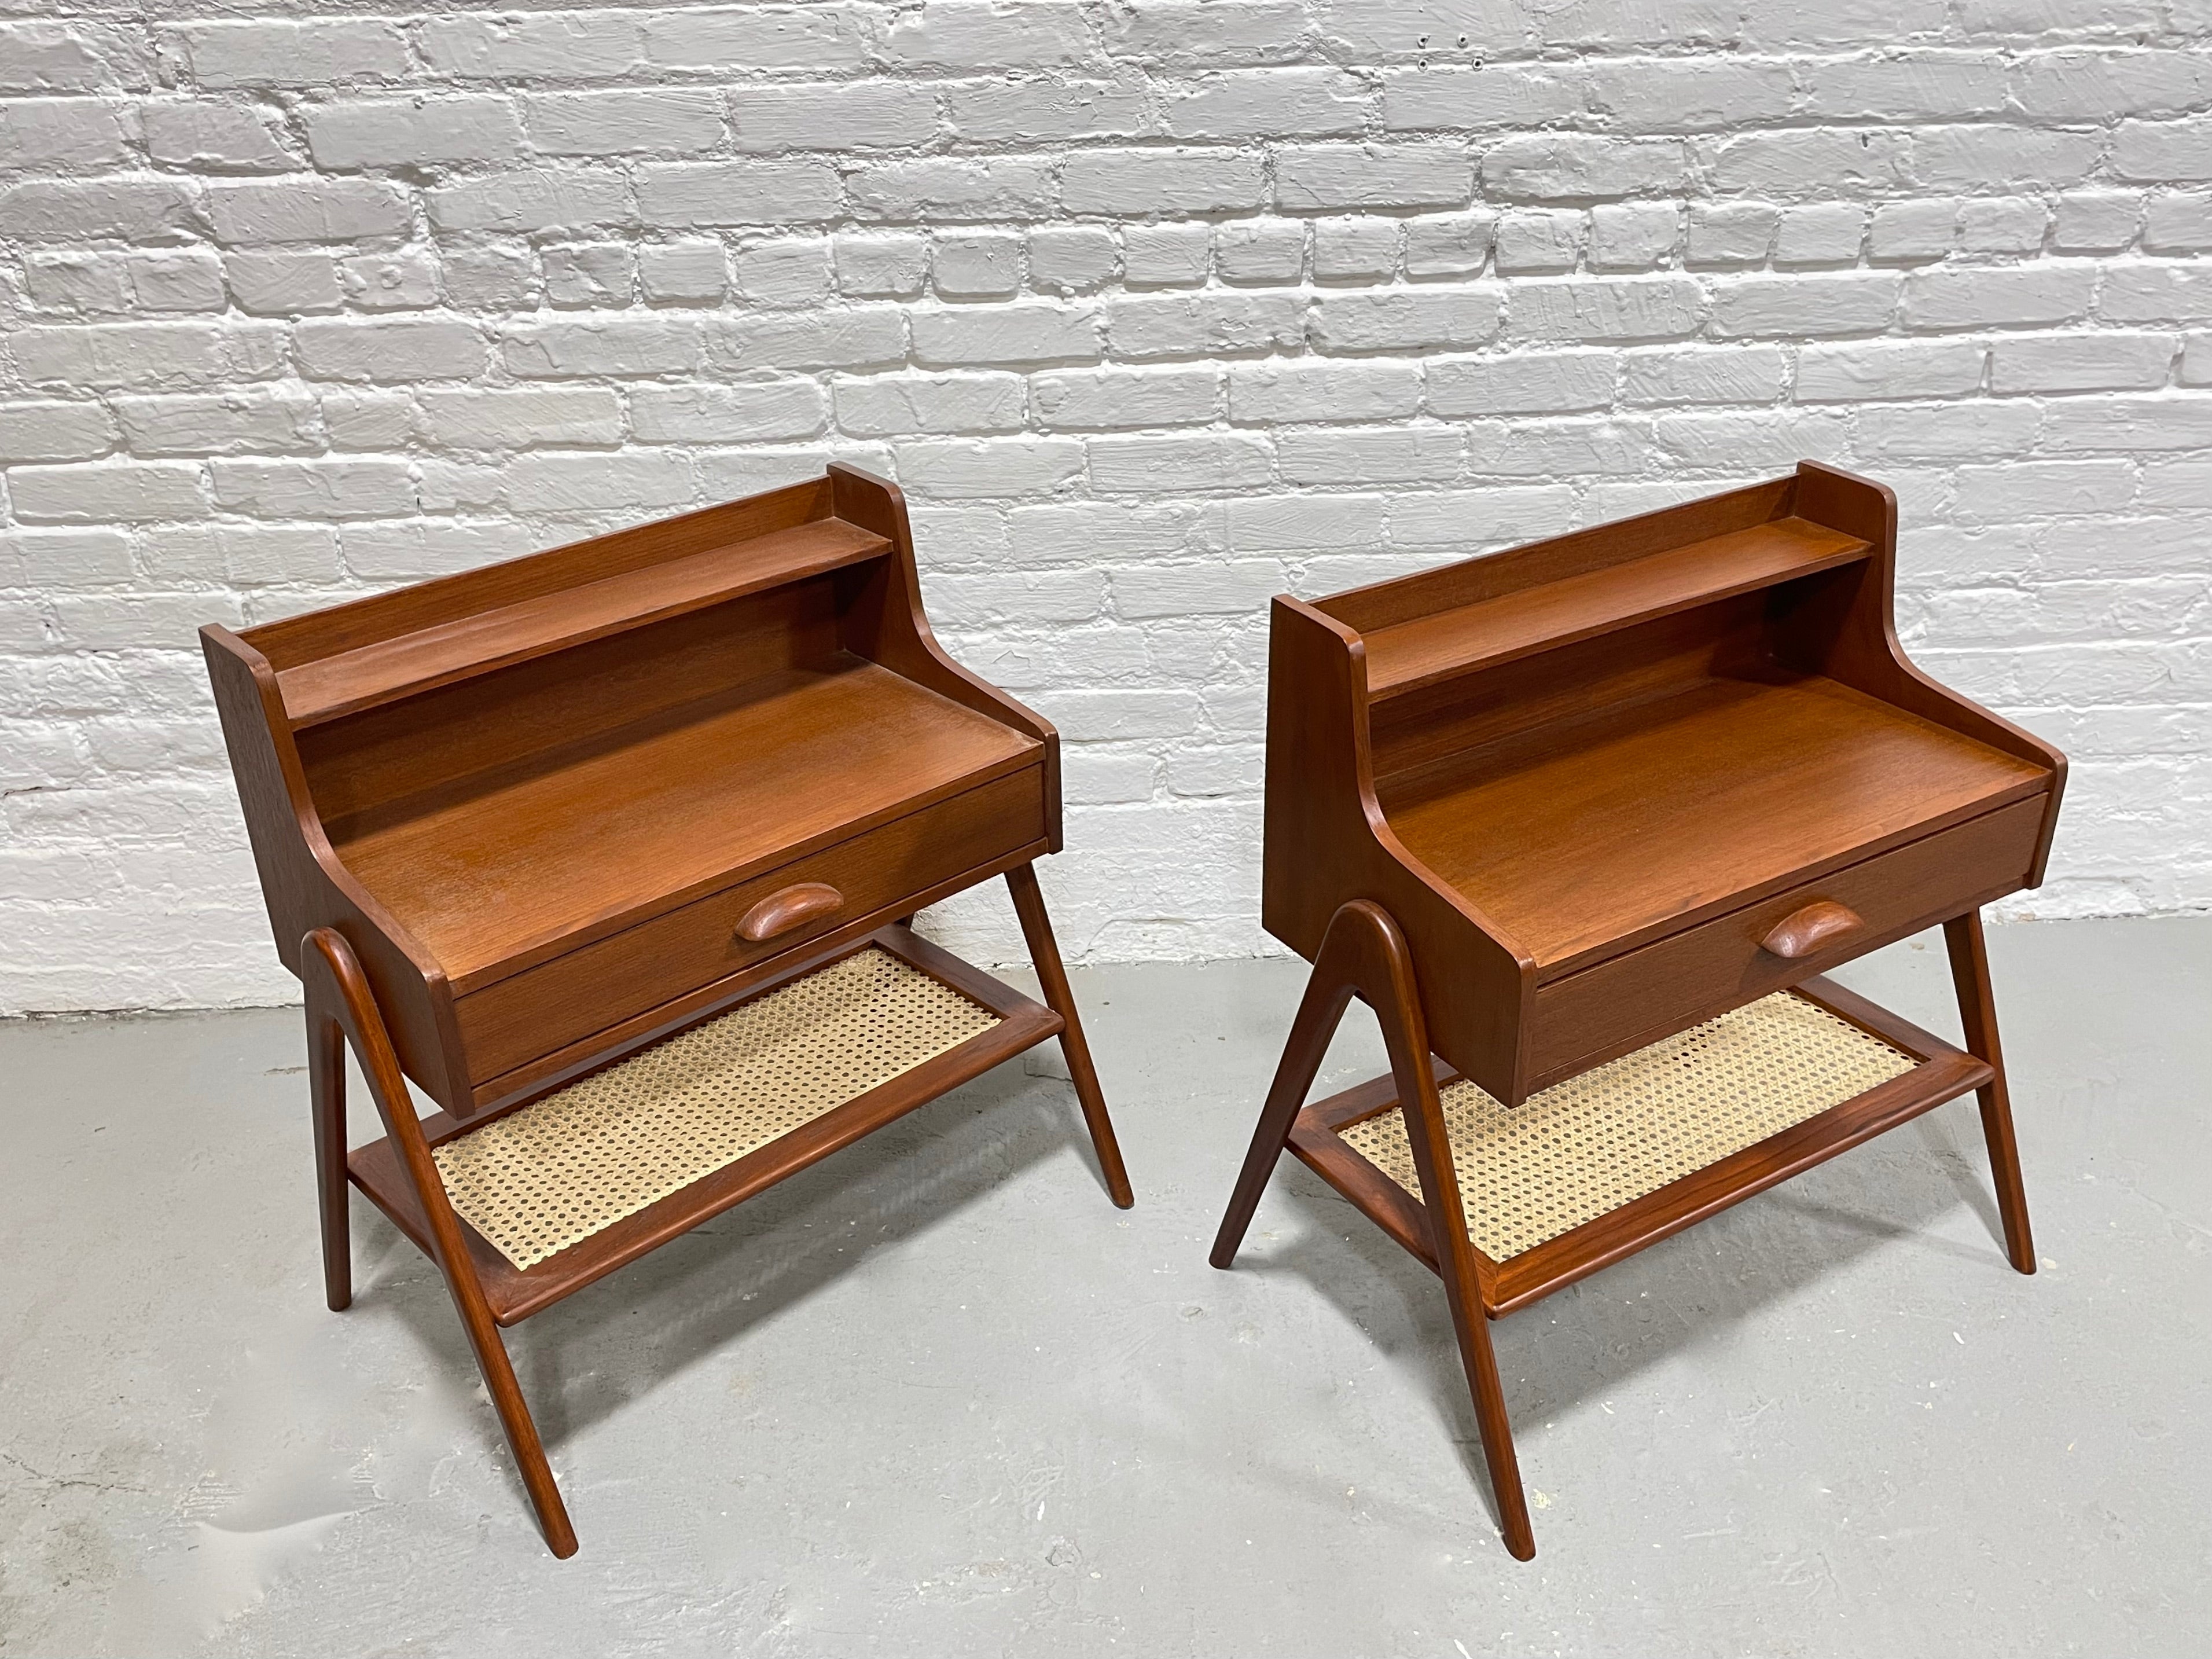 Pair of Mid Century MODERN Handcrafted Caned TEAK CABINETS / Entryway Tables